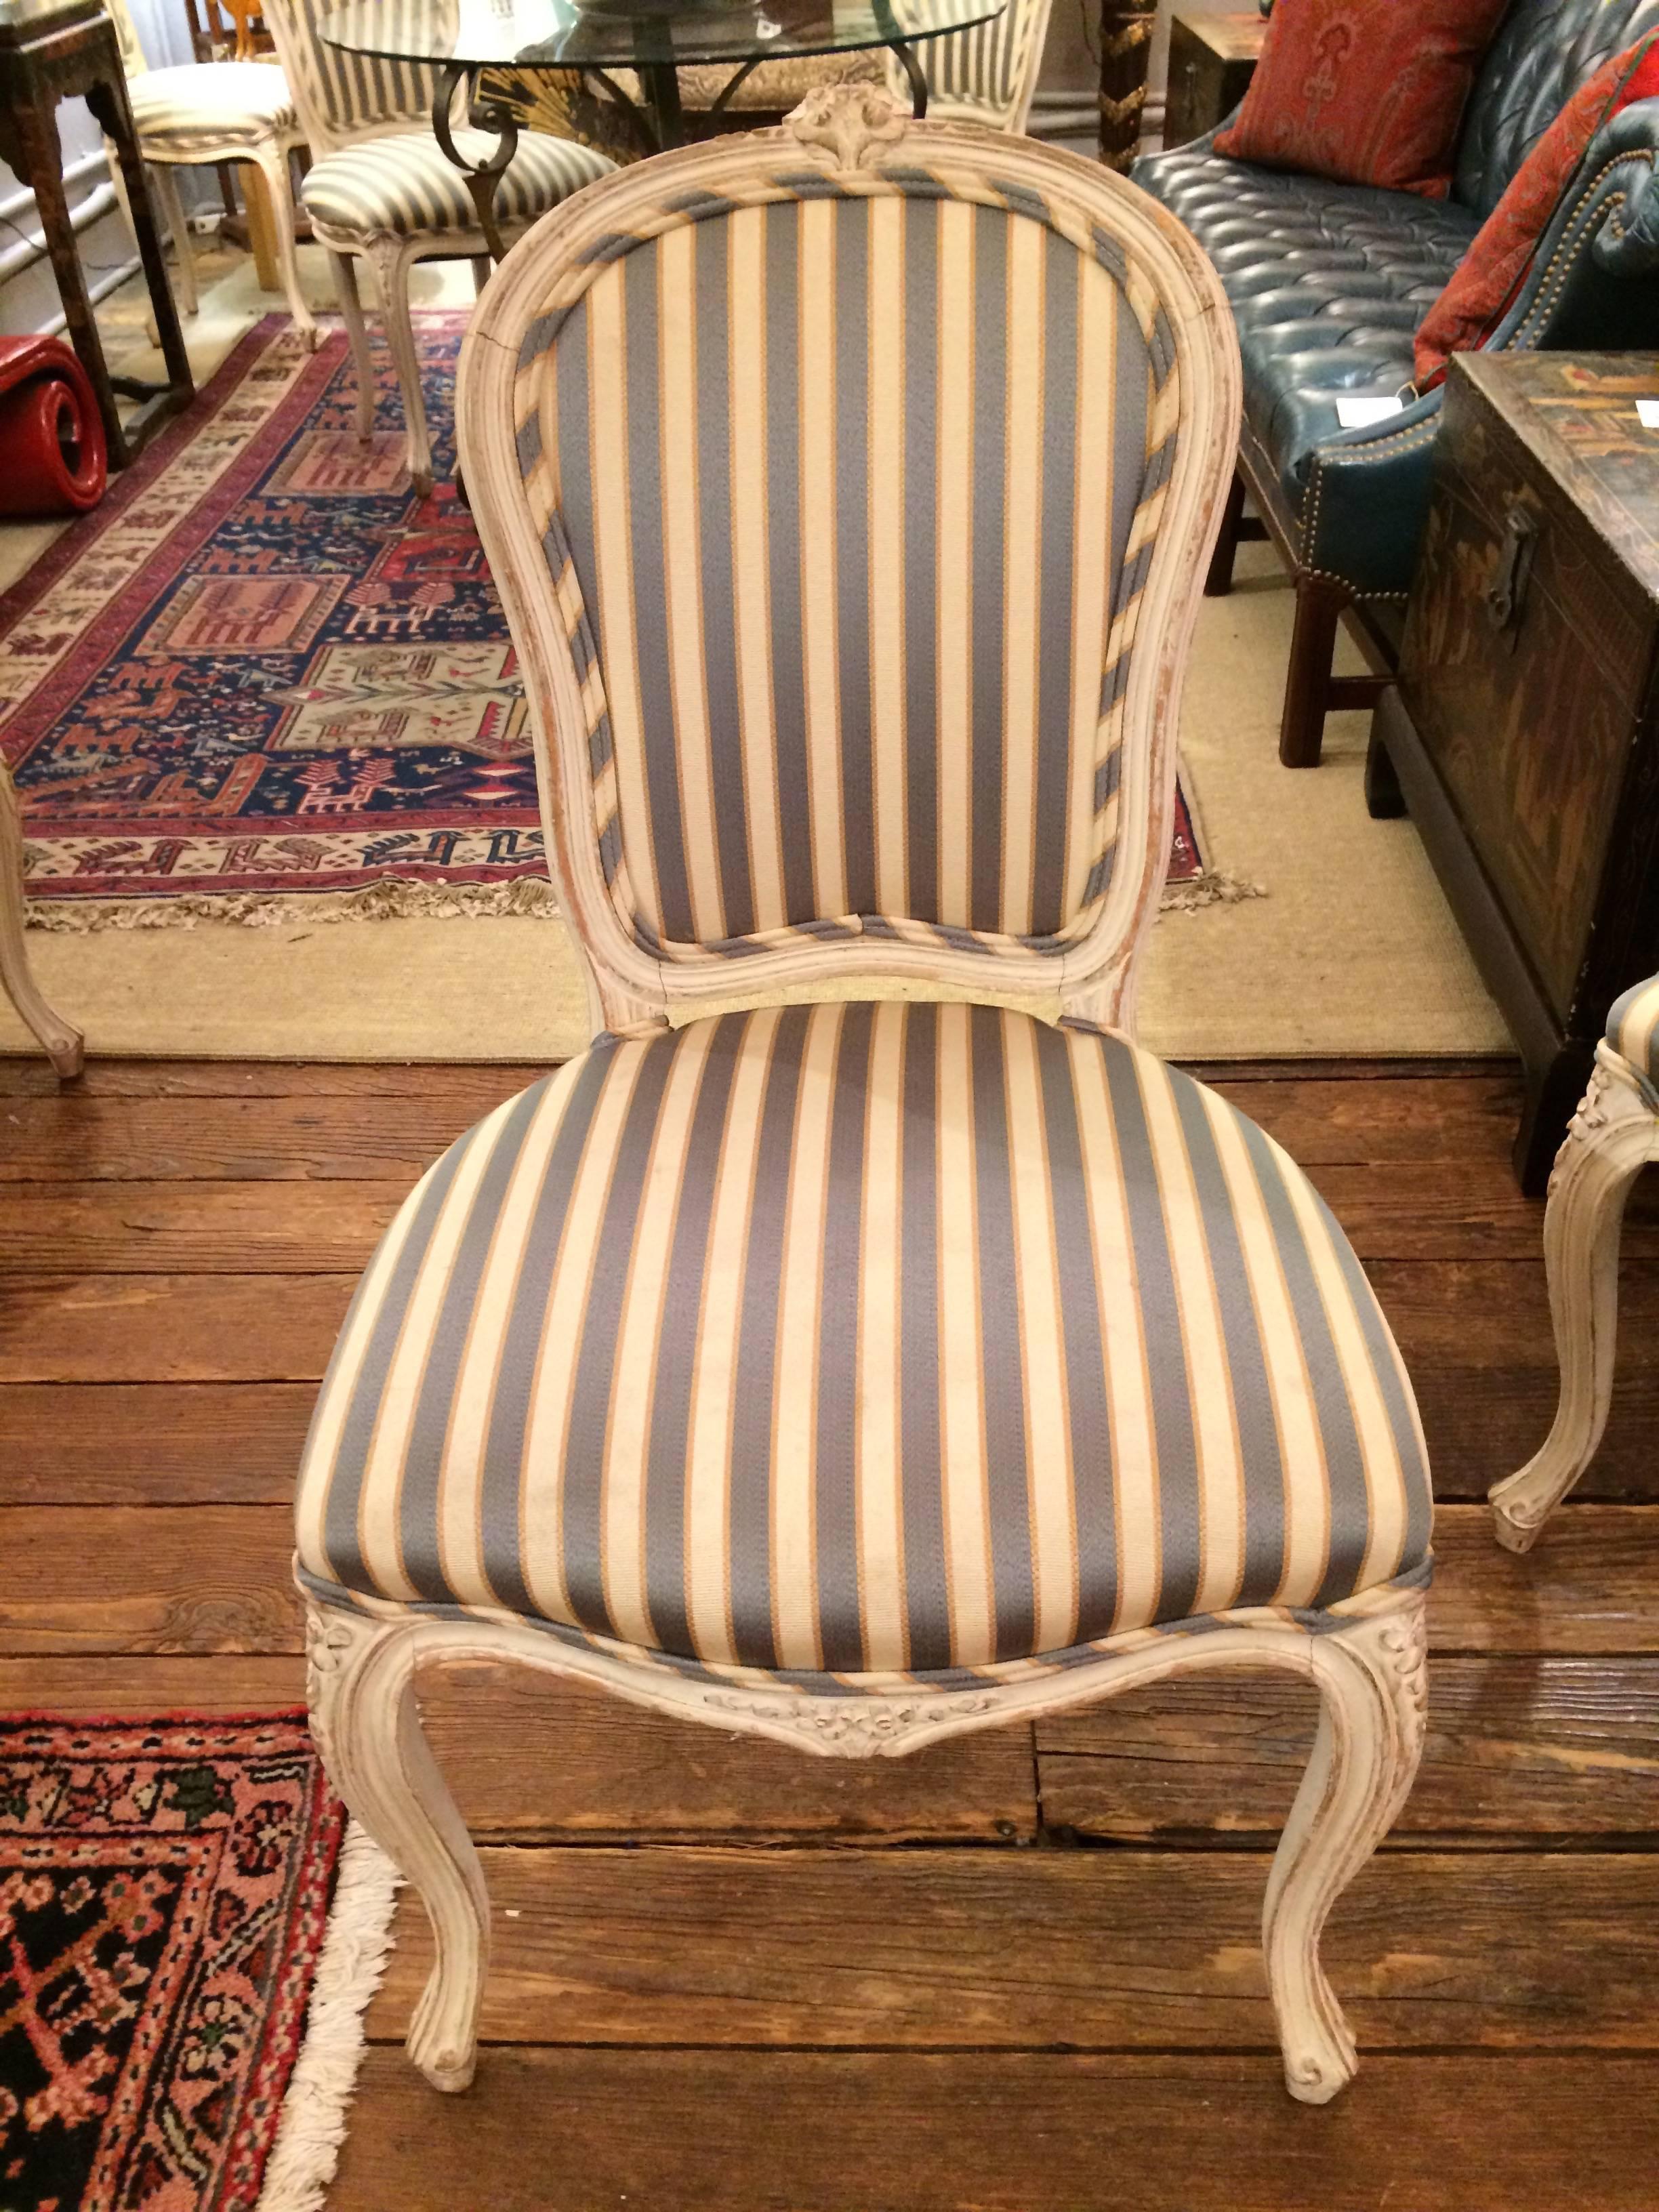 Elegant set of four hand-painted carved wood dining chairs having a slightly distressed finish, Classic French style, with two armchairs and two side chairs, upholstered in a blue and cream stripe. Upholstery has age appropriate wear.
Side chairs